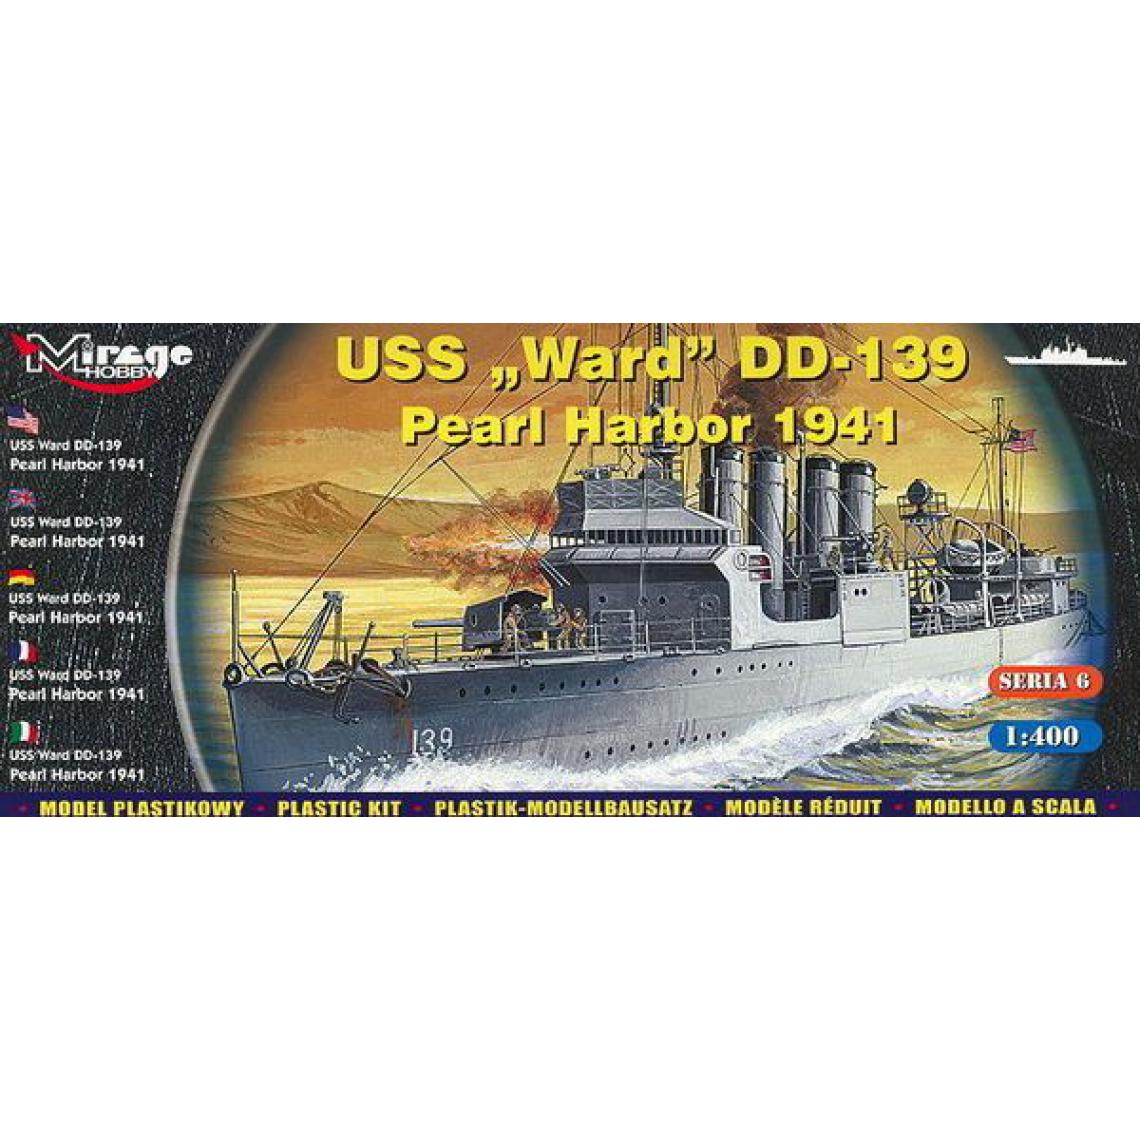 Mirage Hobby - USS Ward DD-139 'Pearl Harbor 1941' - 1:400e - Mirage Hobby - Accessoires et pièces